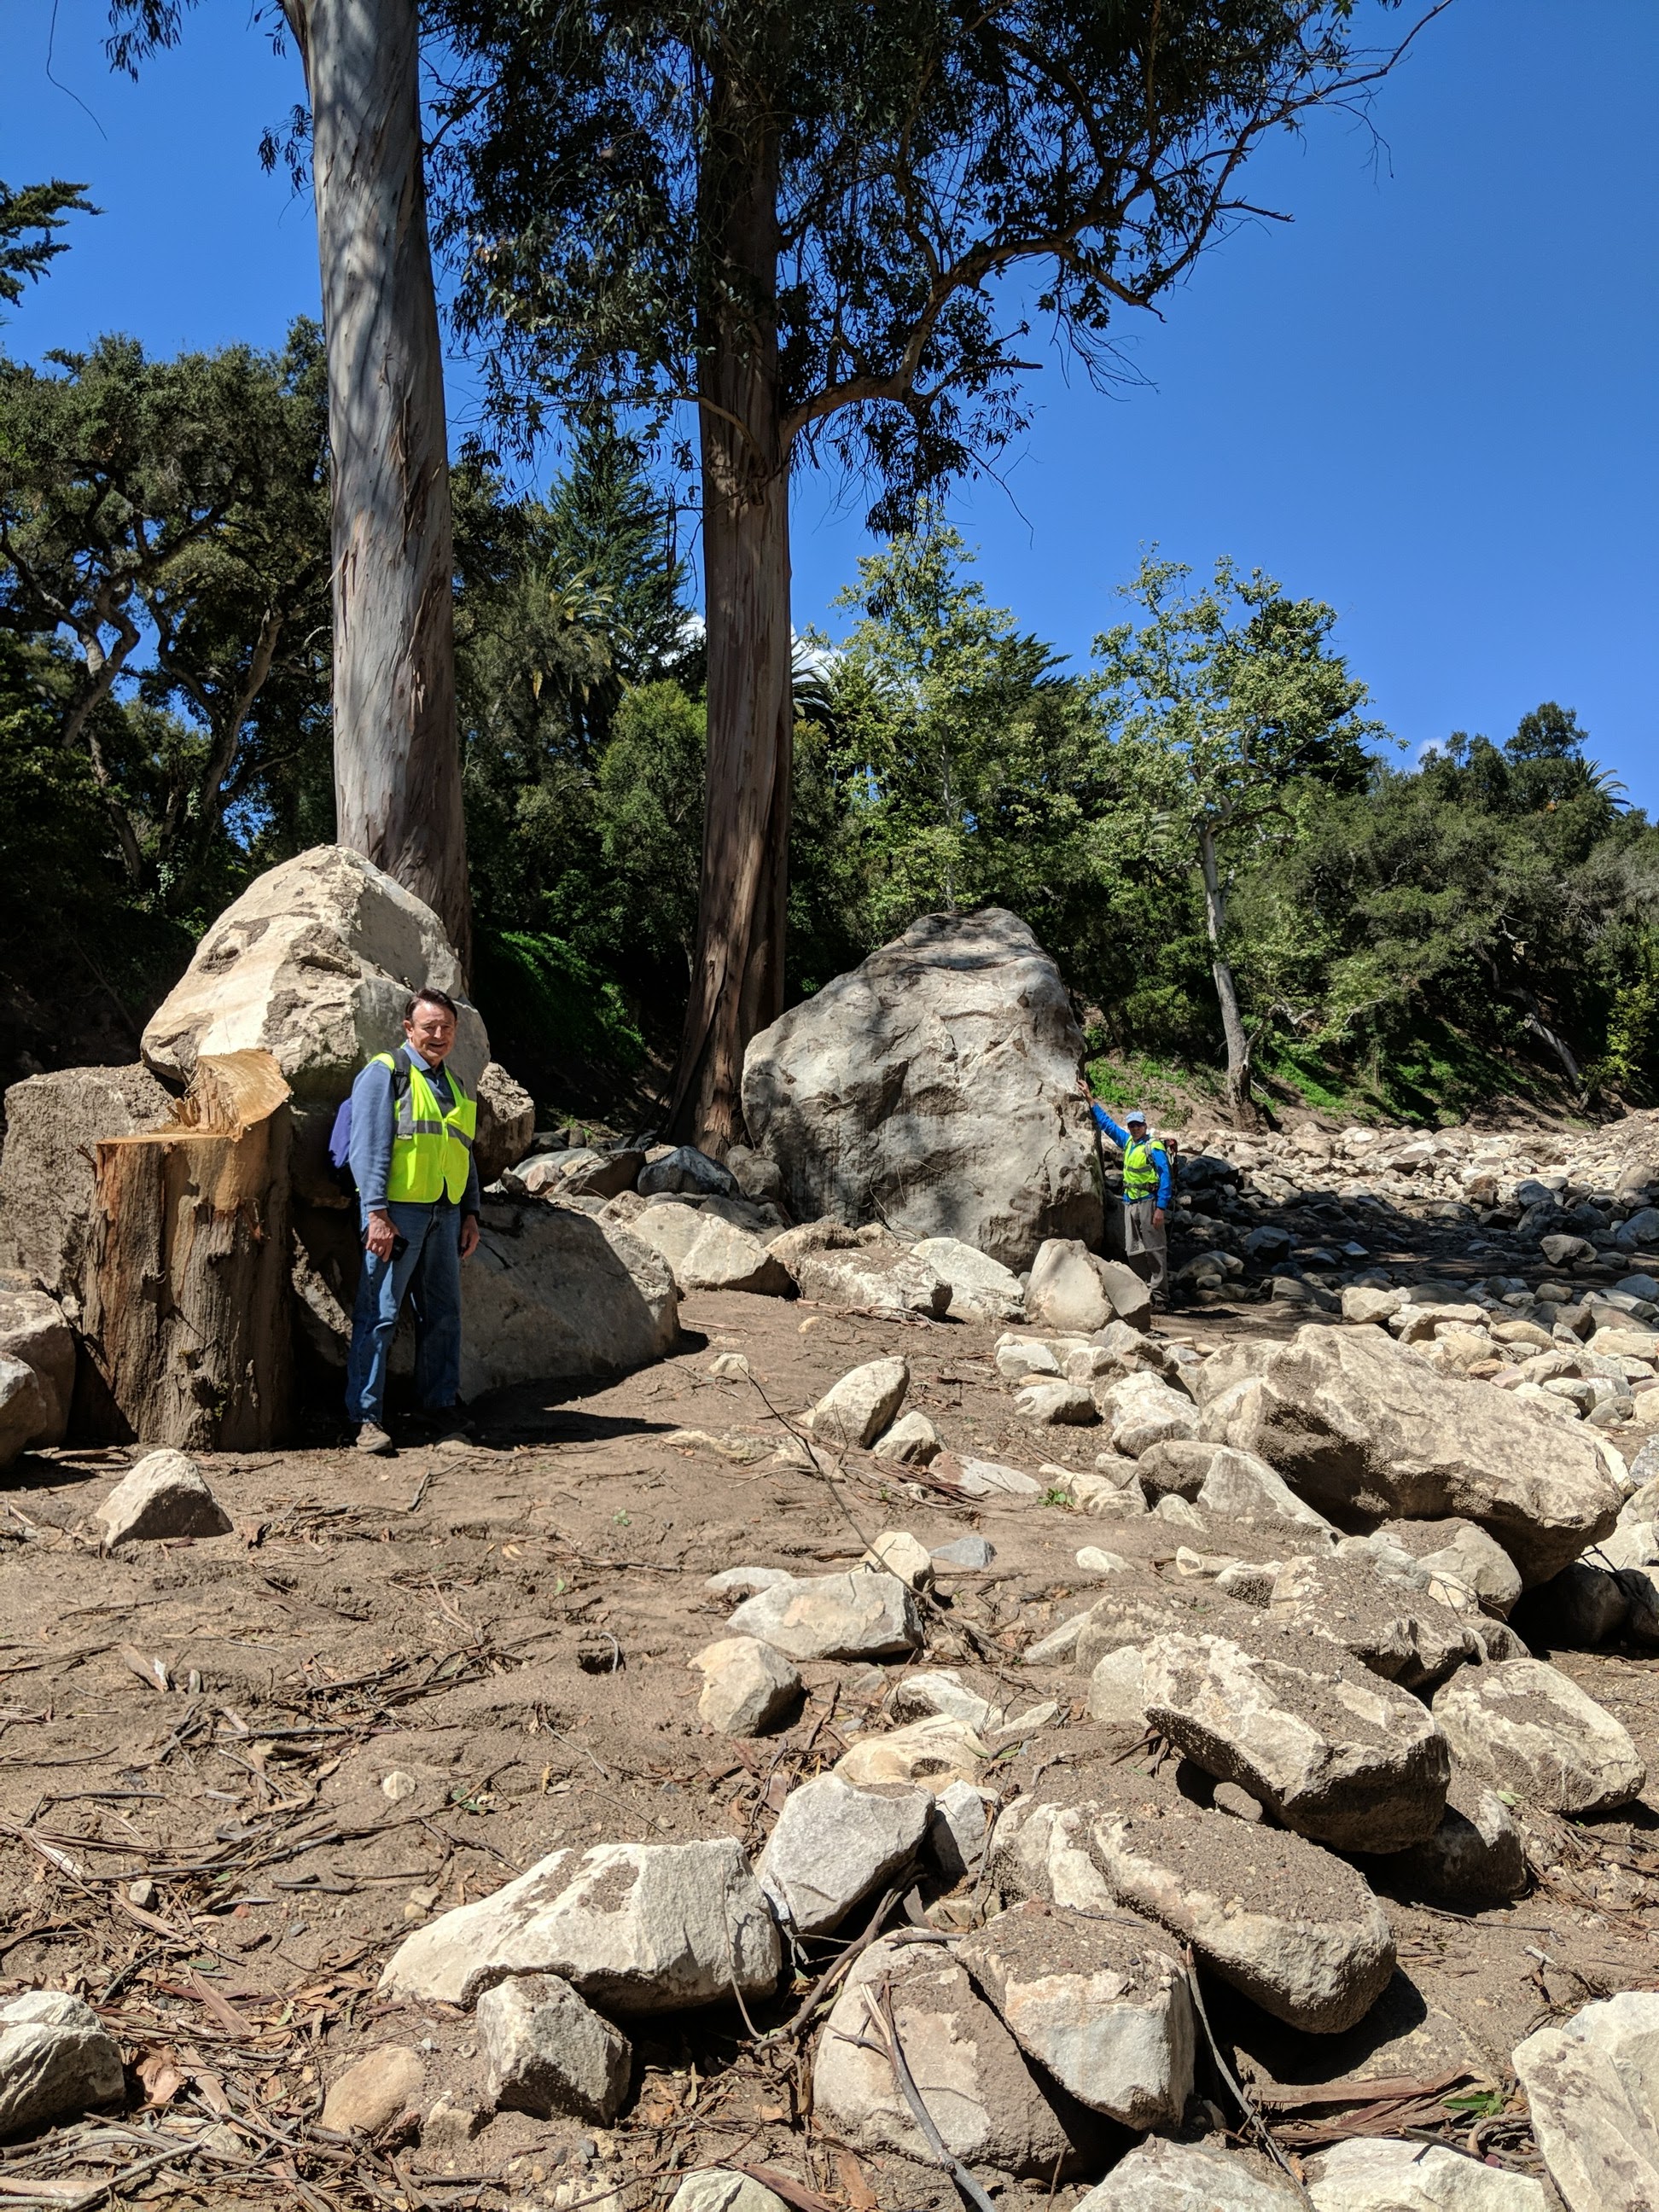 Two scientists stand next to boulders larger than them during field work